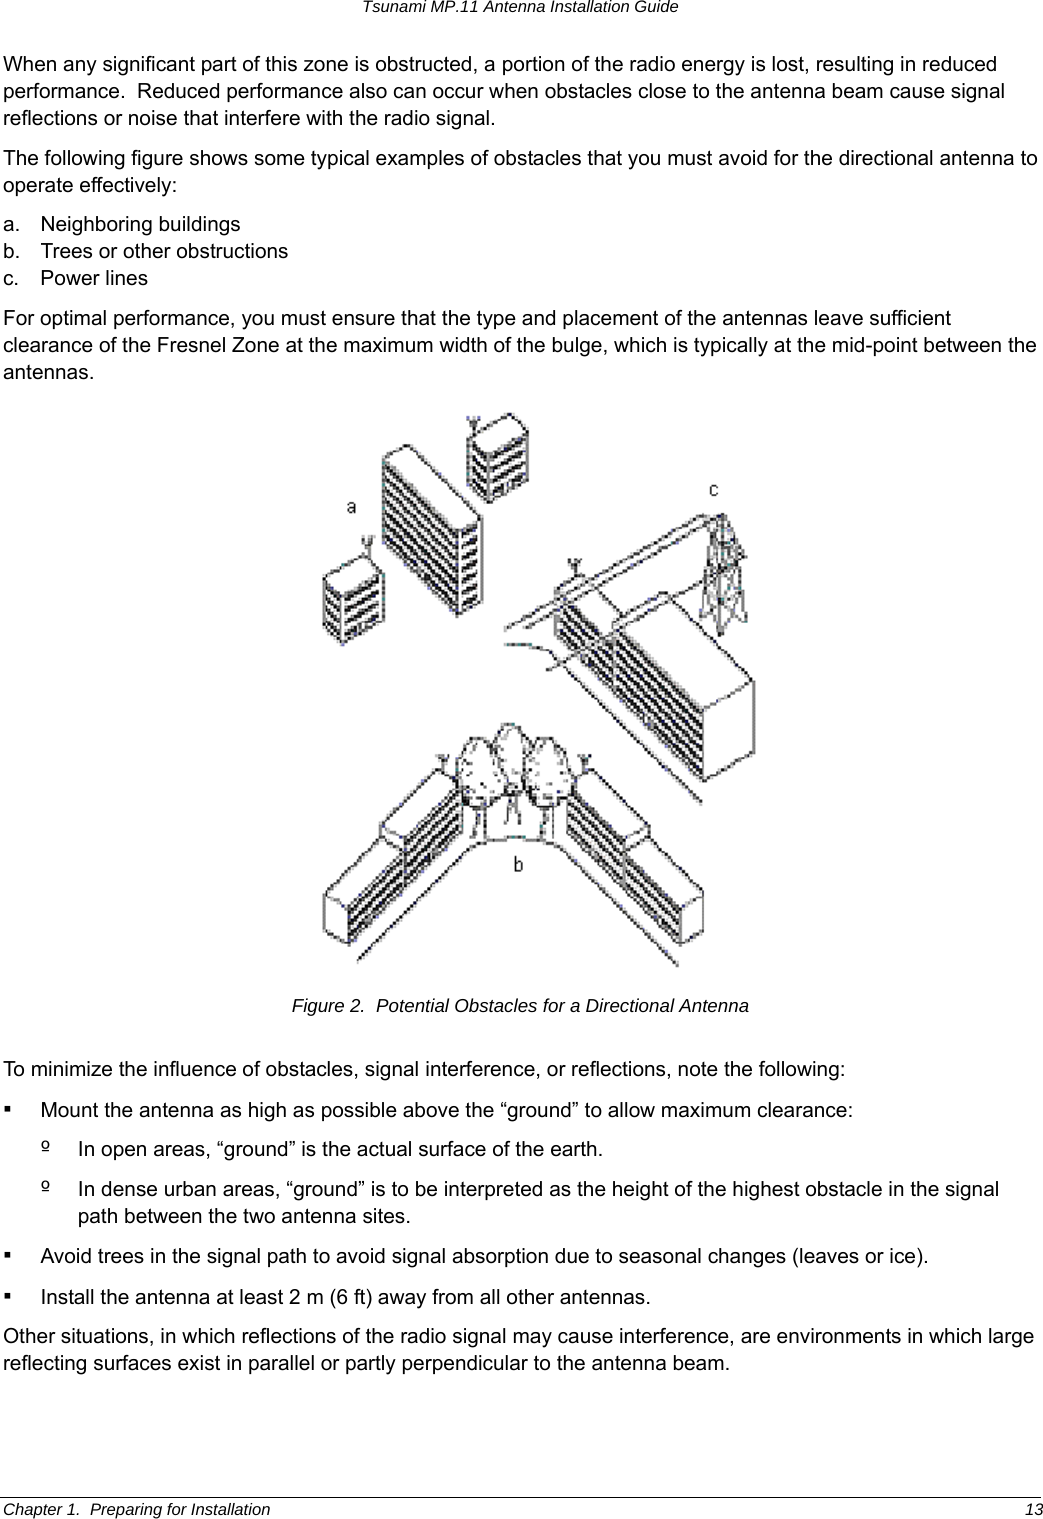 Tsunami MP.11 Antenna Installation Guide When any significant part of this zone is obstructed, a portion of the radio energy is lost, resulting in reduced performance.  Reduced performance also can occur when obstacles close to the antenna beam cause signal reflections or noise that interfere with the radio signal. The following figure shows some typical examples of obstacles that you must avoid for the directional antenna to operate effectively: a. Neighboring buildings b.  Trees or other obstructions c. Power lines For optimal performance, you must ensure that the type and placement of the antennas leave sufficient clearance of the Fresnel Zone at the maximum width of the bulge, which is typically at the mid-point between the antennas.  Figure 2.  Potential Obstacles for a Directional Antenna To minimize the influence of obstacles, signal interference, or reflections, note the following: ▪ Mount the antenna as high as possible above the “ground” to allow maximum clearance: º  In open areas, “ground” is the actual surface of the earth. º  In dense urban areas, “ground” is to be interpreted as the height of the highest obstacle in the signal path between the two antenna sites. ▪ Avoid trees in the signal path to avoid signal absorption due to seasonal changes (leaves or ice). ▪ Install the antenna at least 2 m (6 ft) away from all other antennas. Other situations, in which reflections of the radio signal may cause interference, are environments in which large reflecting surfaces exist in parallel or partly perpendicular to the antenna beam. Chapter 1.  Preparing for Installation  13 